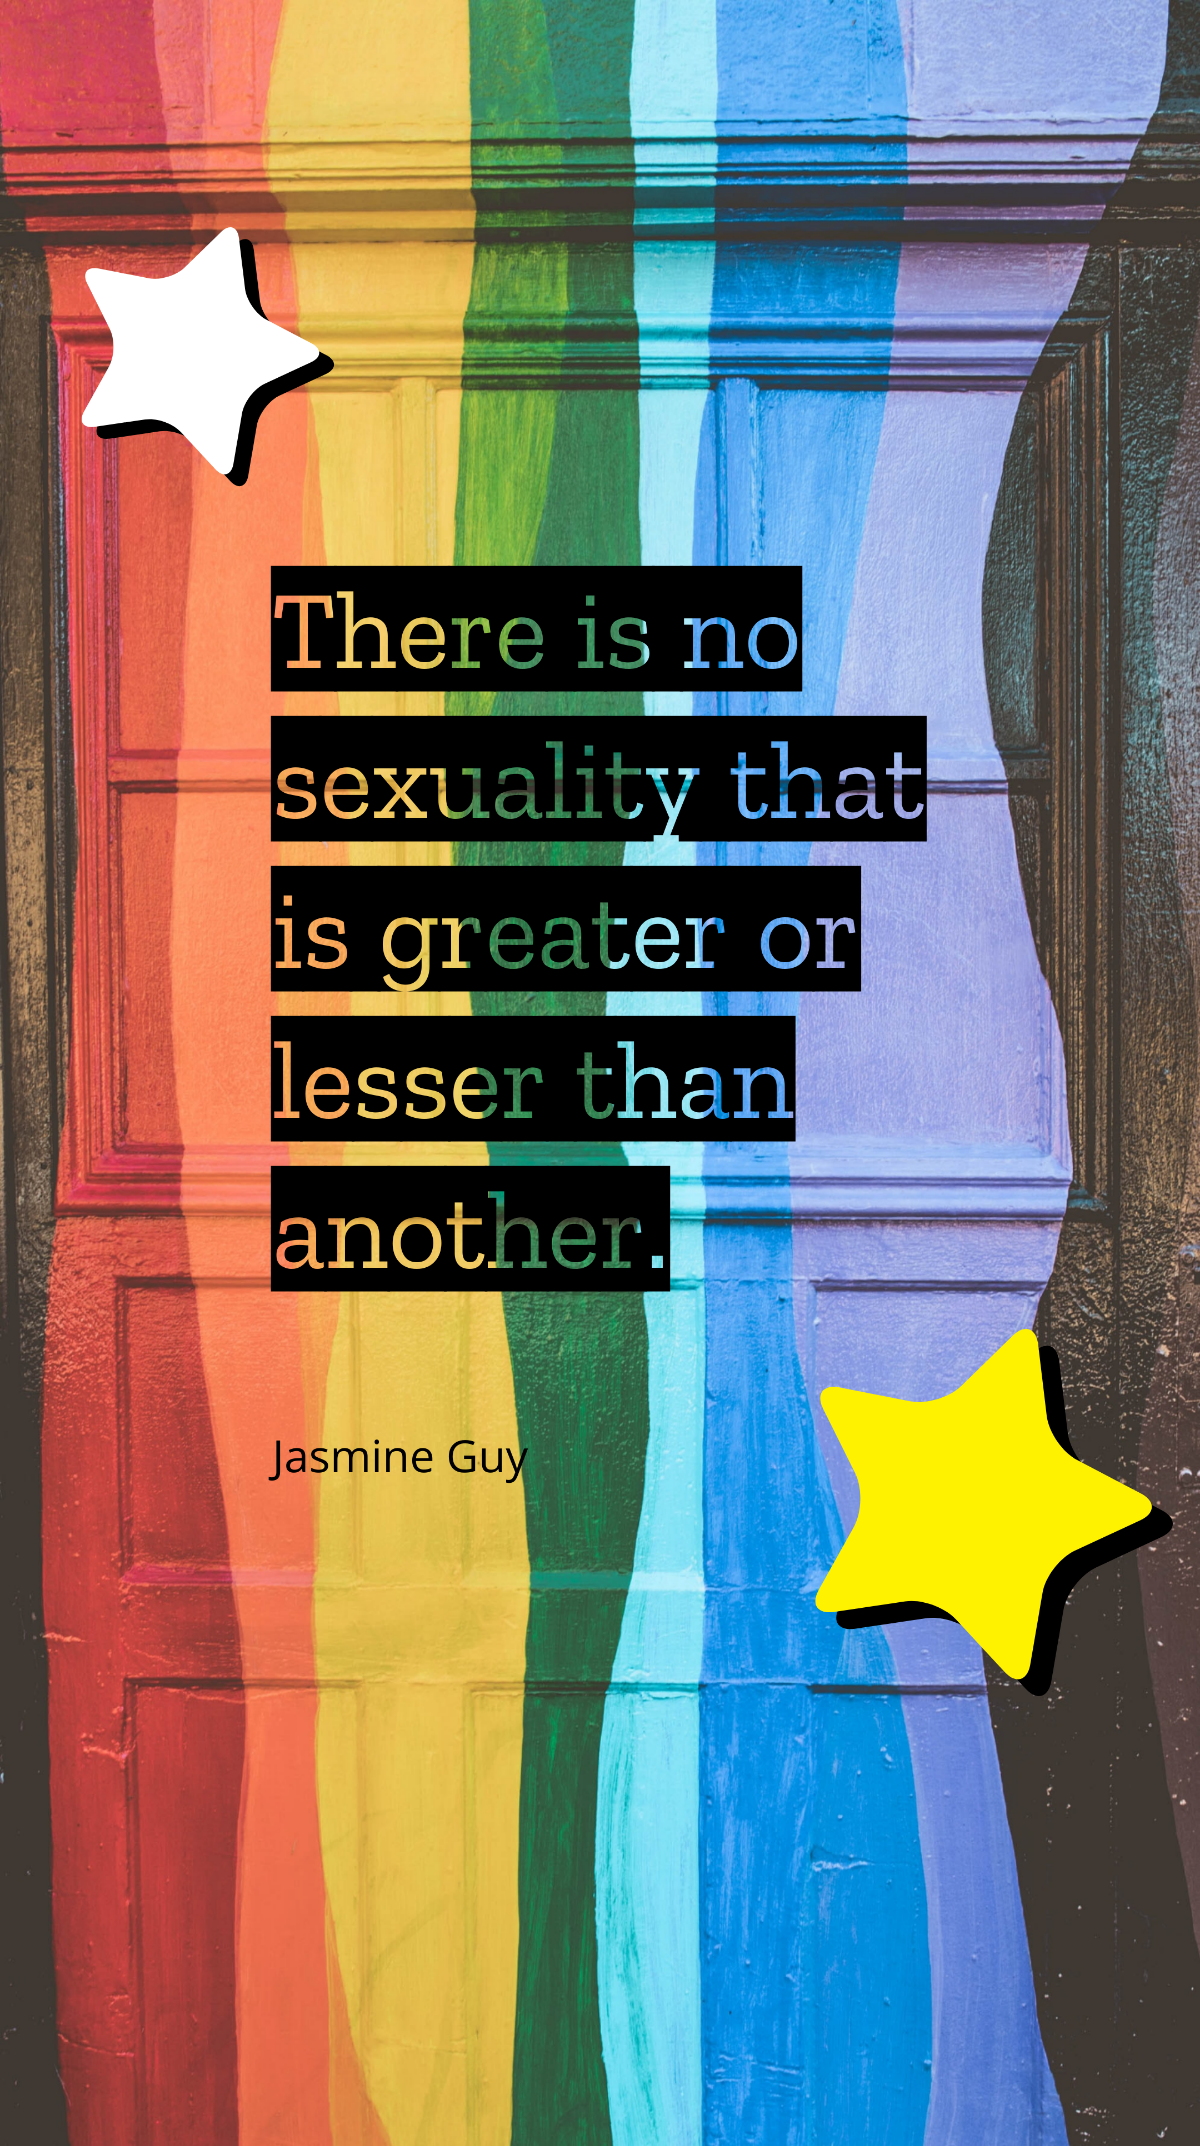 Jasmine Guy - There is no sexuality that is greater or lesser than another. Template